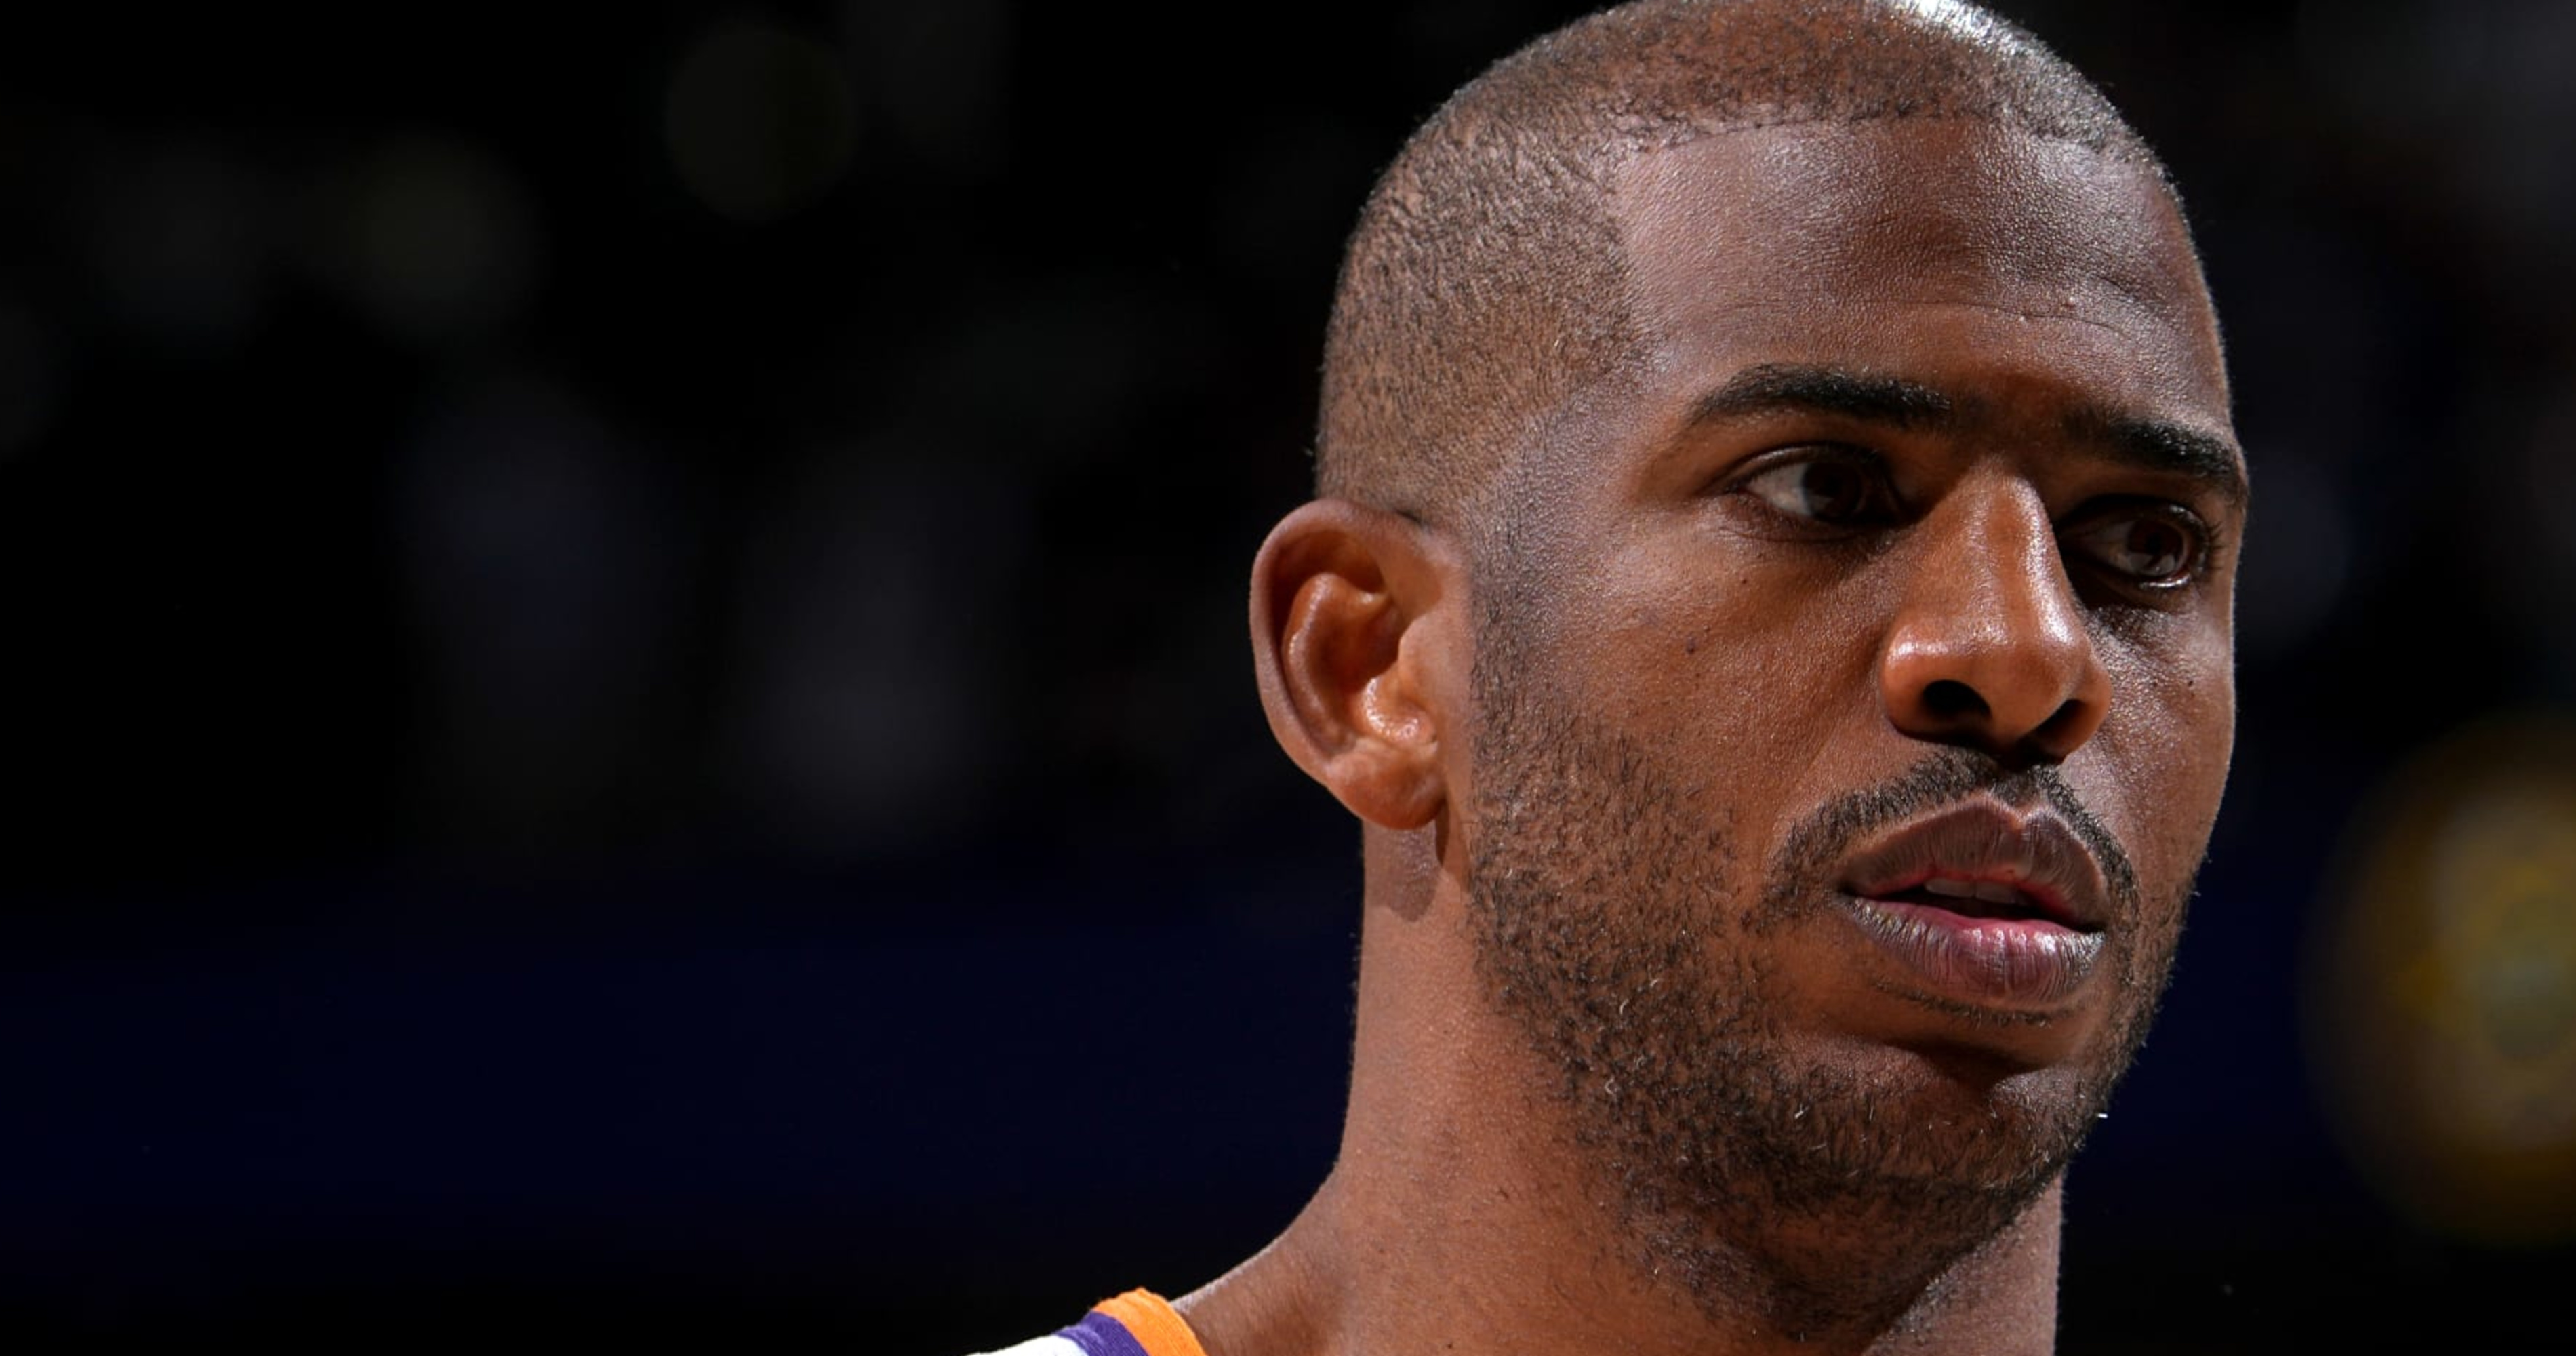 I'm back': Suns' Chris Paul announces his return in Game 4 against Lakers